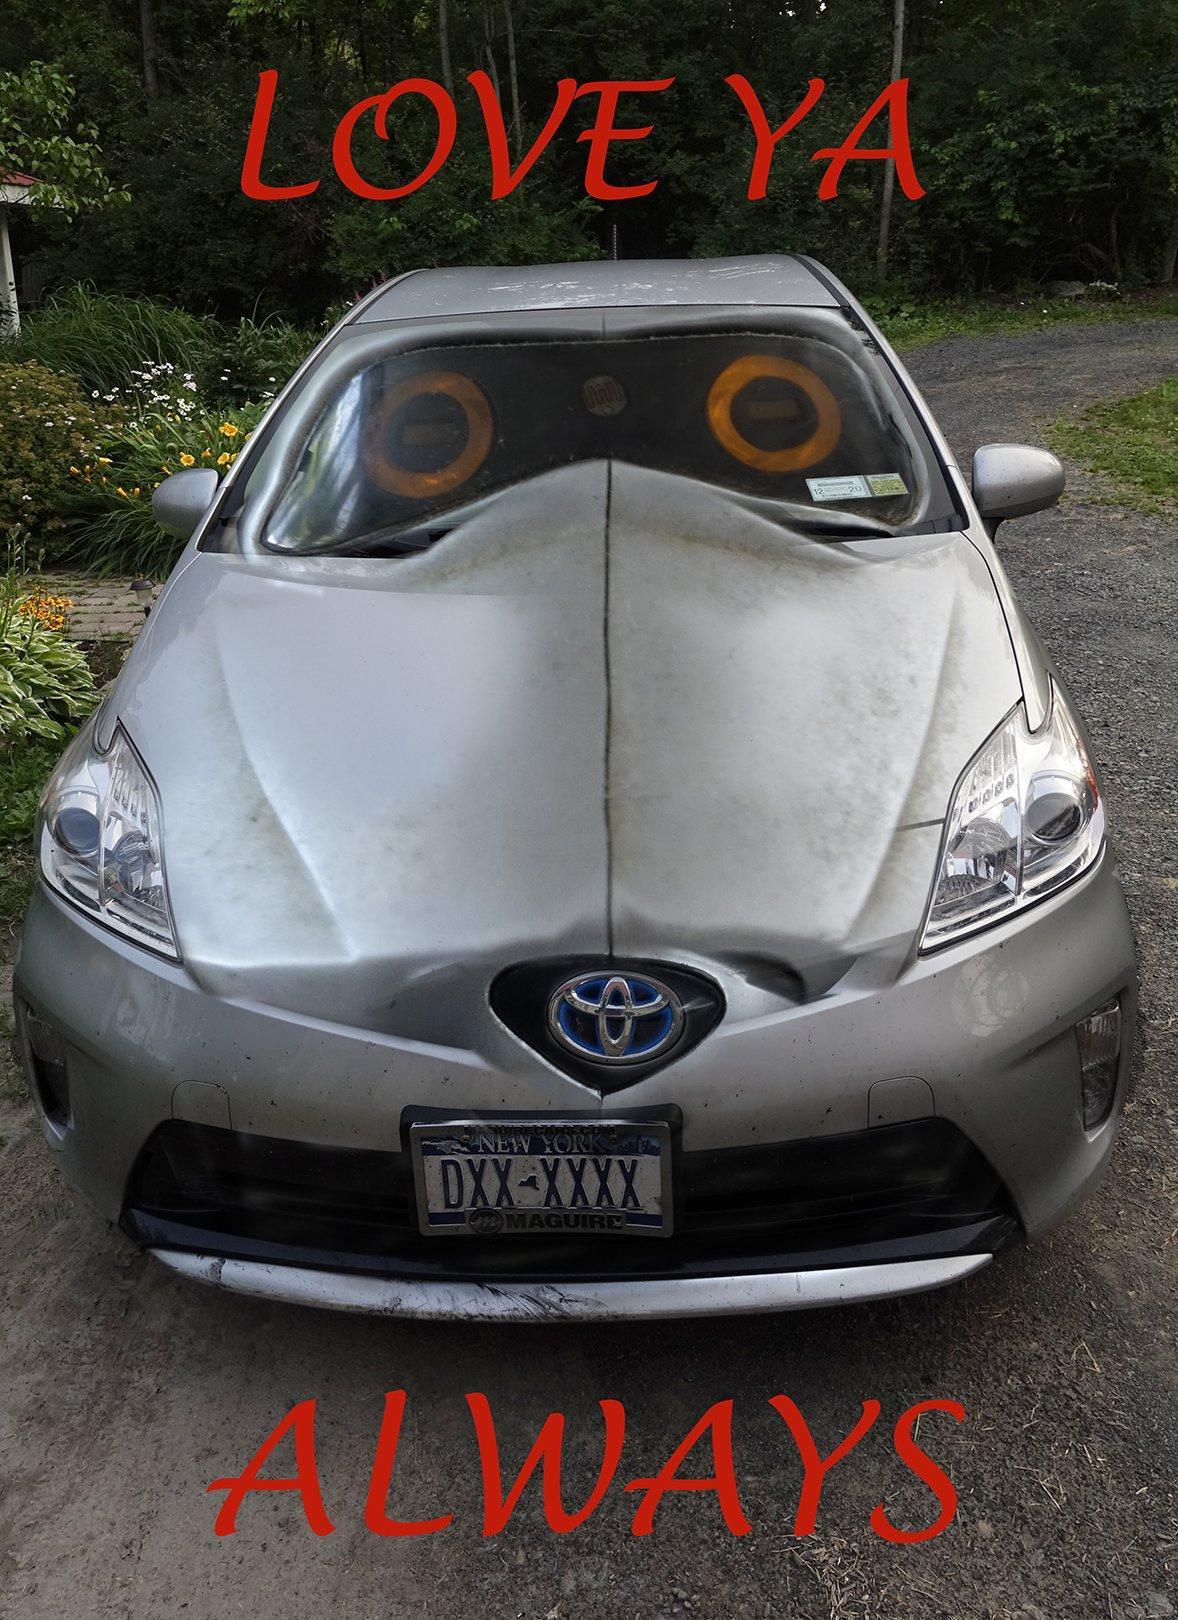 Robin Botie of Ithaca, New York photoshops her banged up Prius as she wonders why she is carrying on about loving and losing a car.